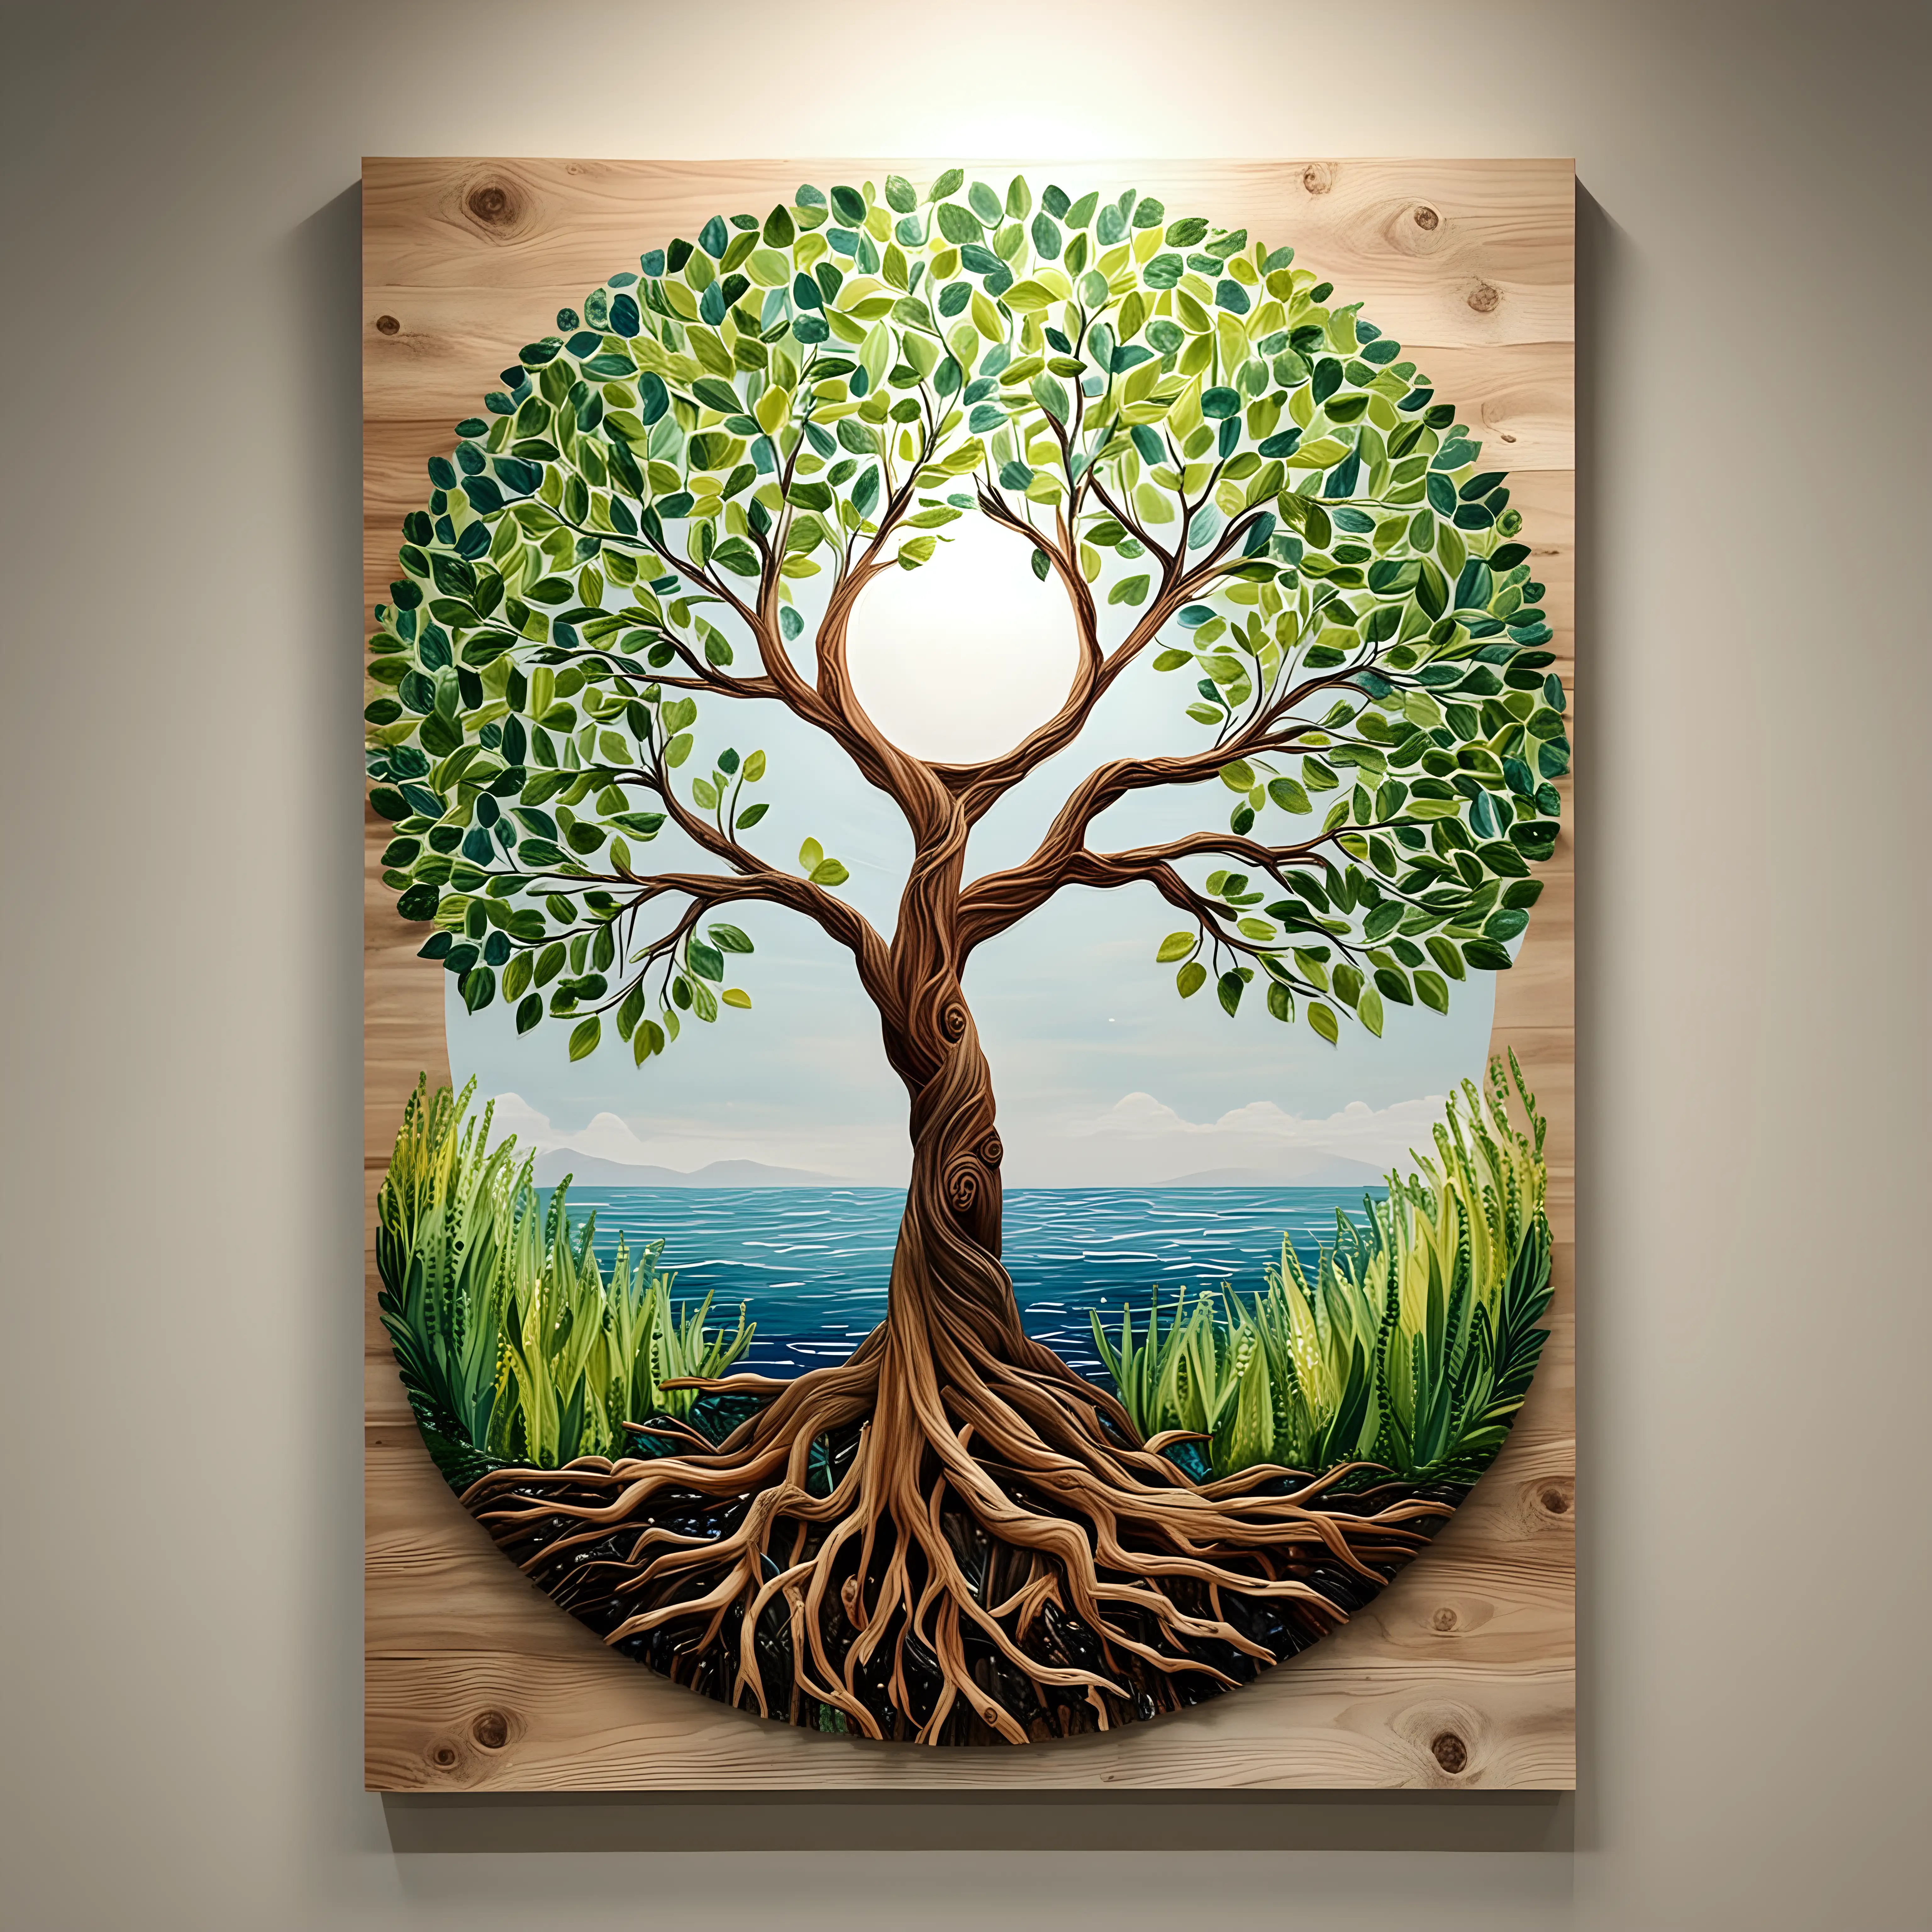 create a beautiful work of art for a mental health counselors office.  It must reflect balance, and resilience but still have the beauty of nature 